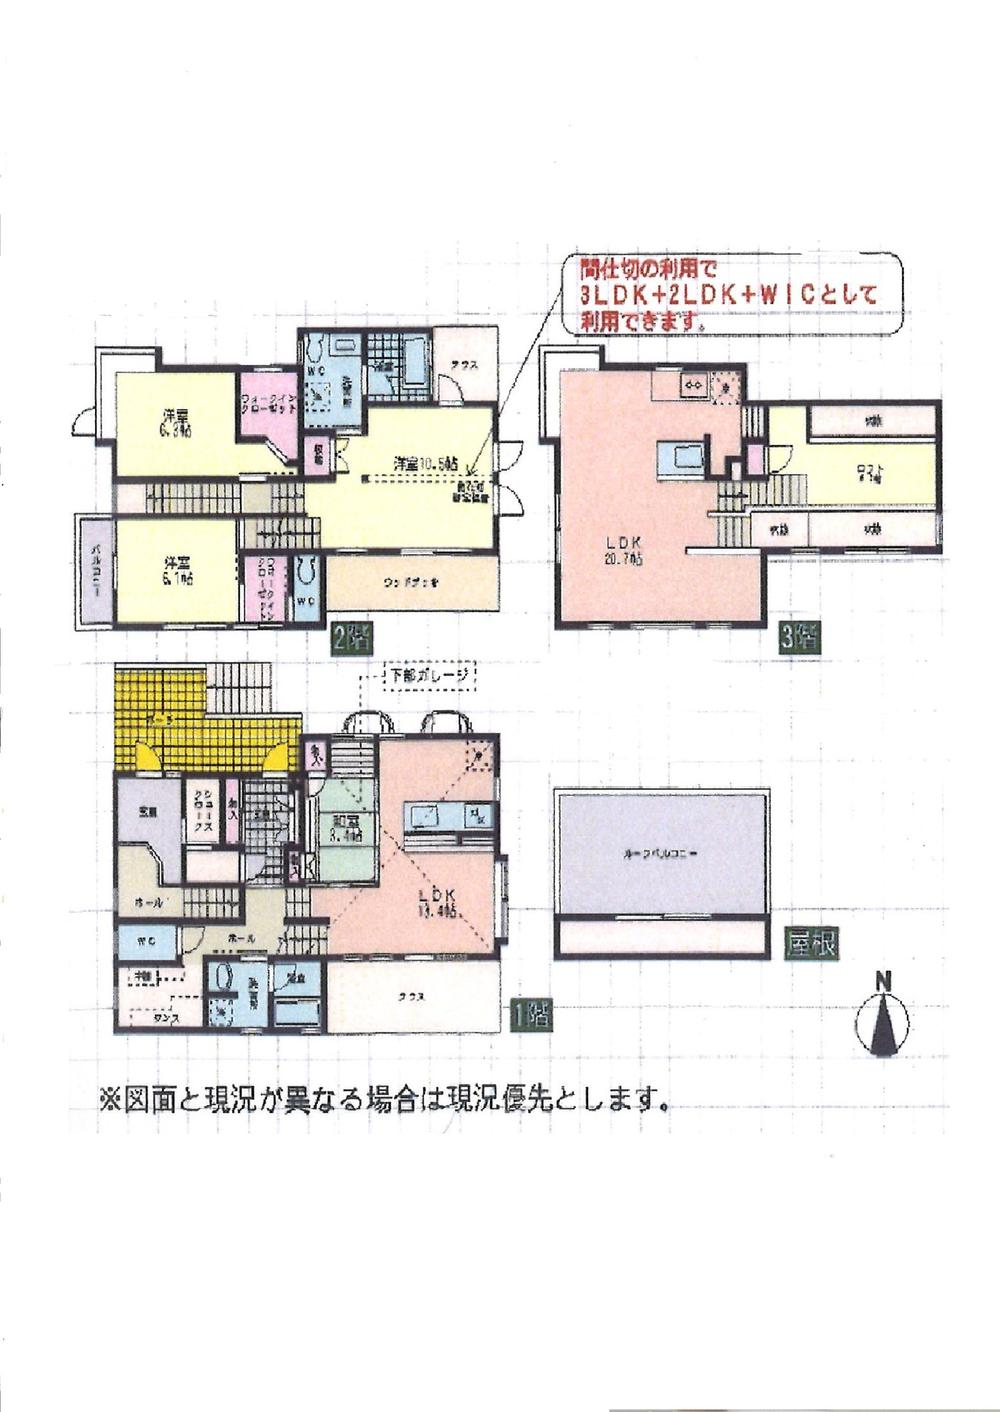 Floor plan. 82,800,000 yen, 4LLDDKK + 3S (storeroom), Land area 175.33 sq m , Entrance to the building area 192.16 sq m 3 households are independent, LDK, bus, Is a floor plan that has led even while having a toilet. 